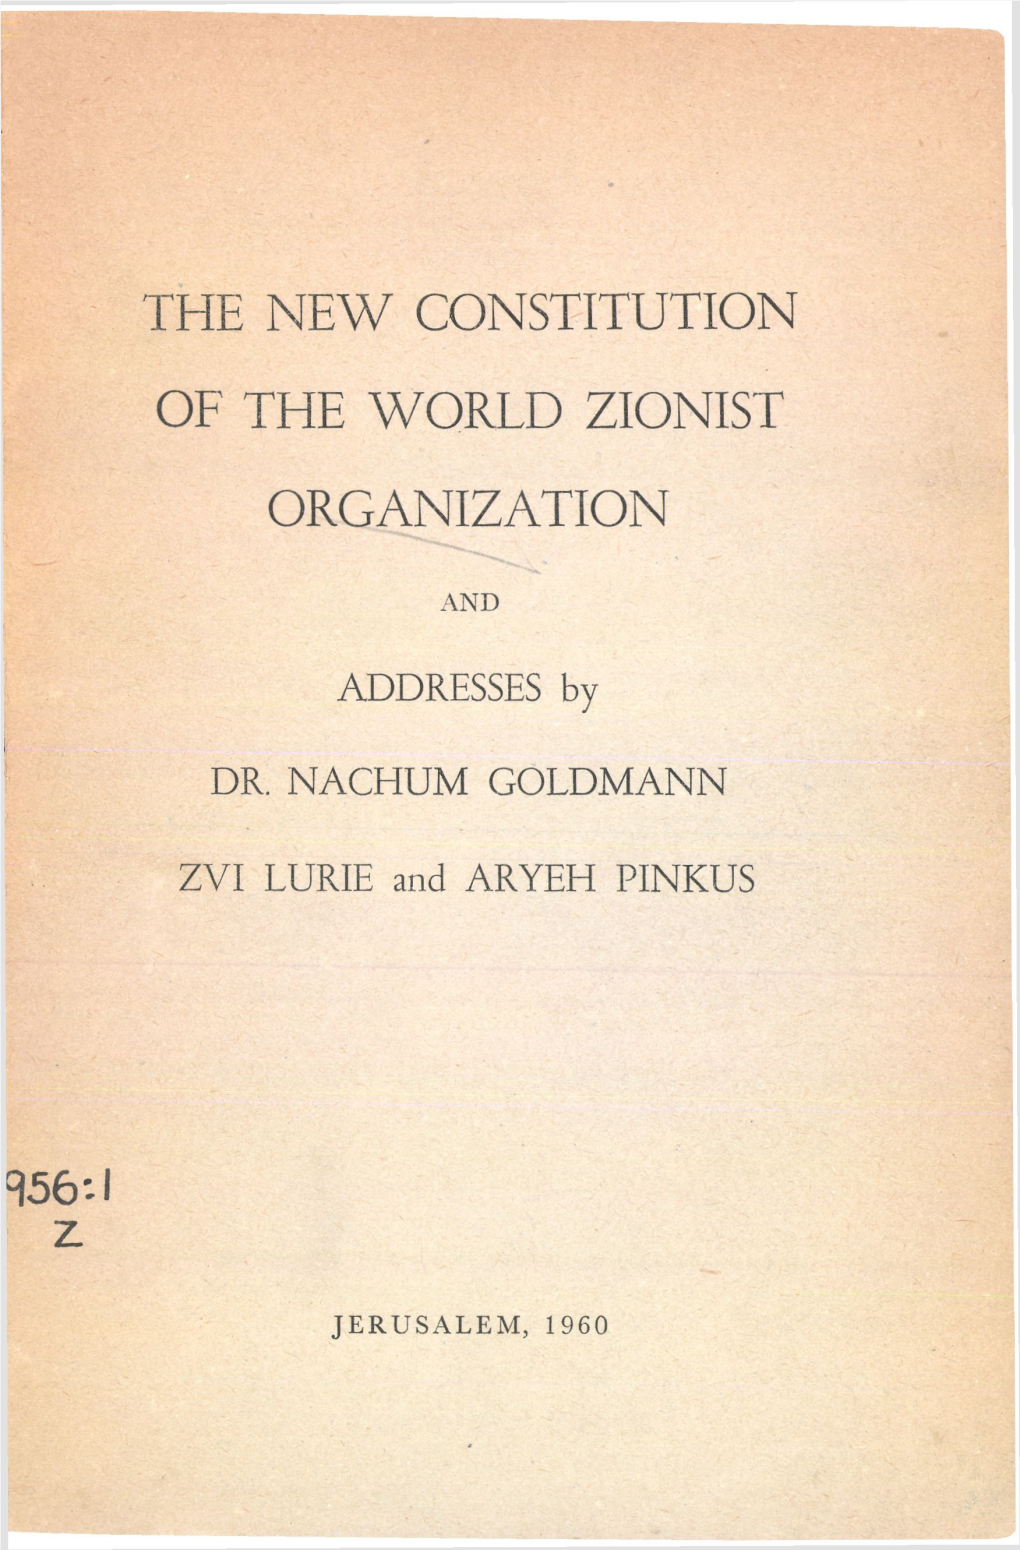 The New Constitution of the World Zionist Organization